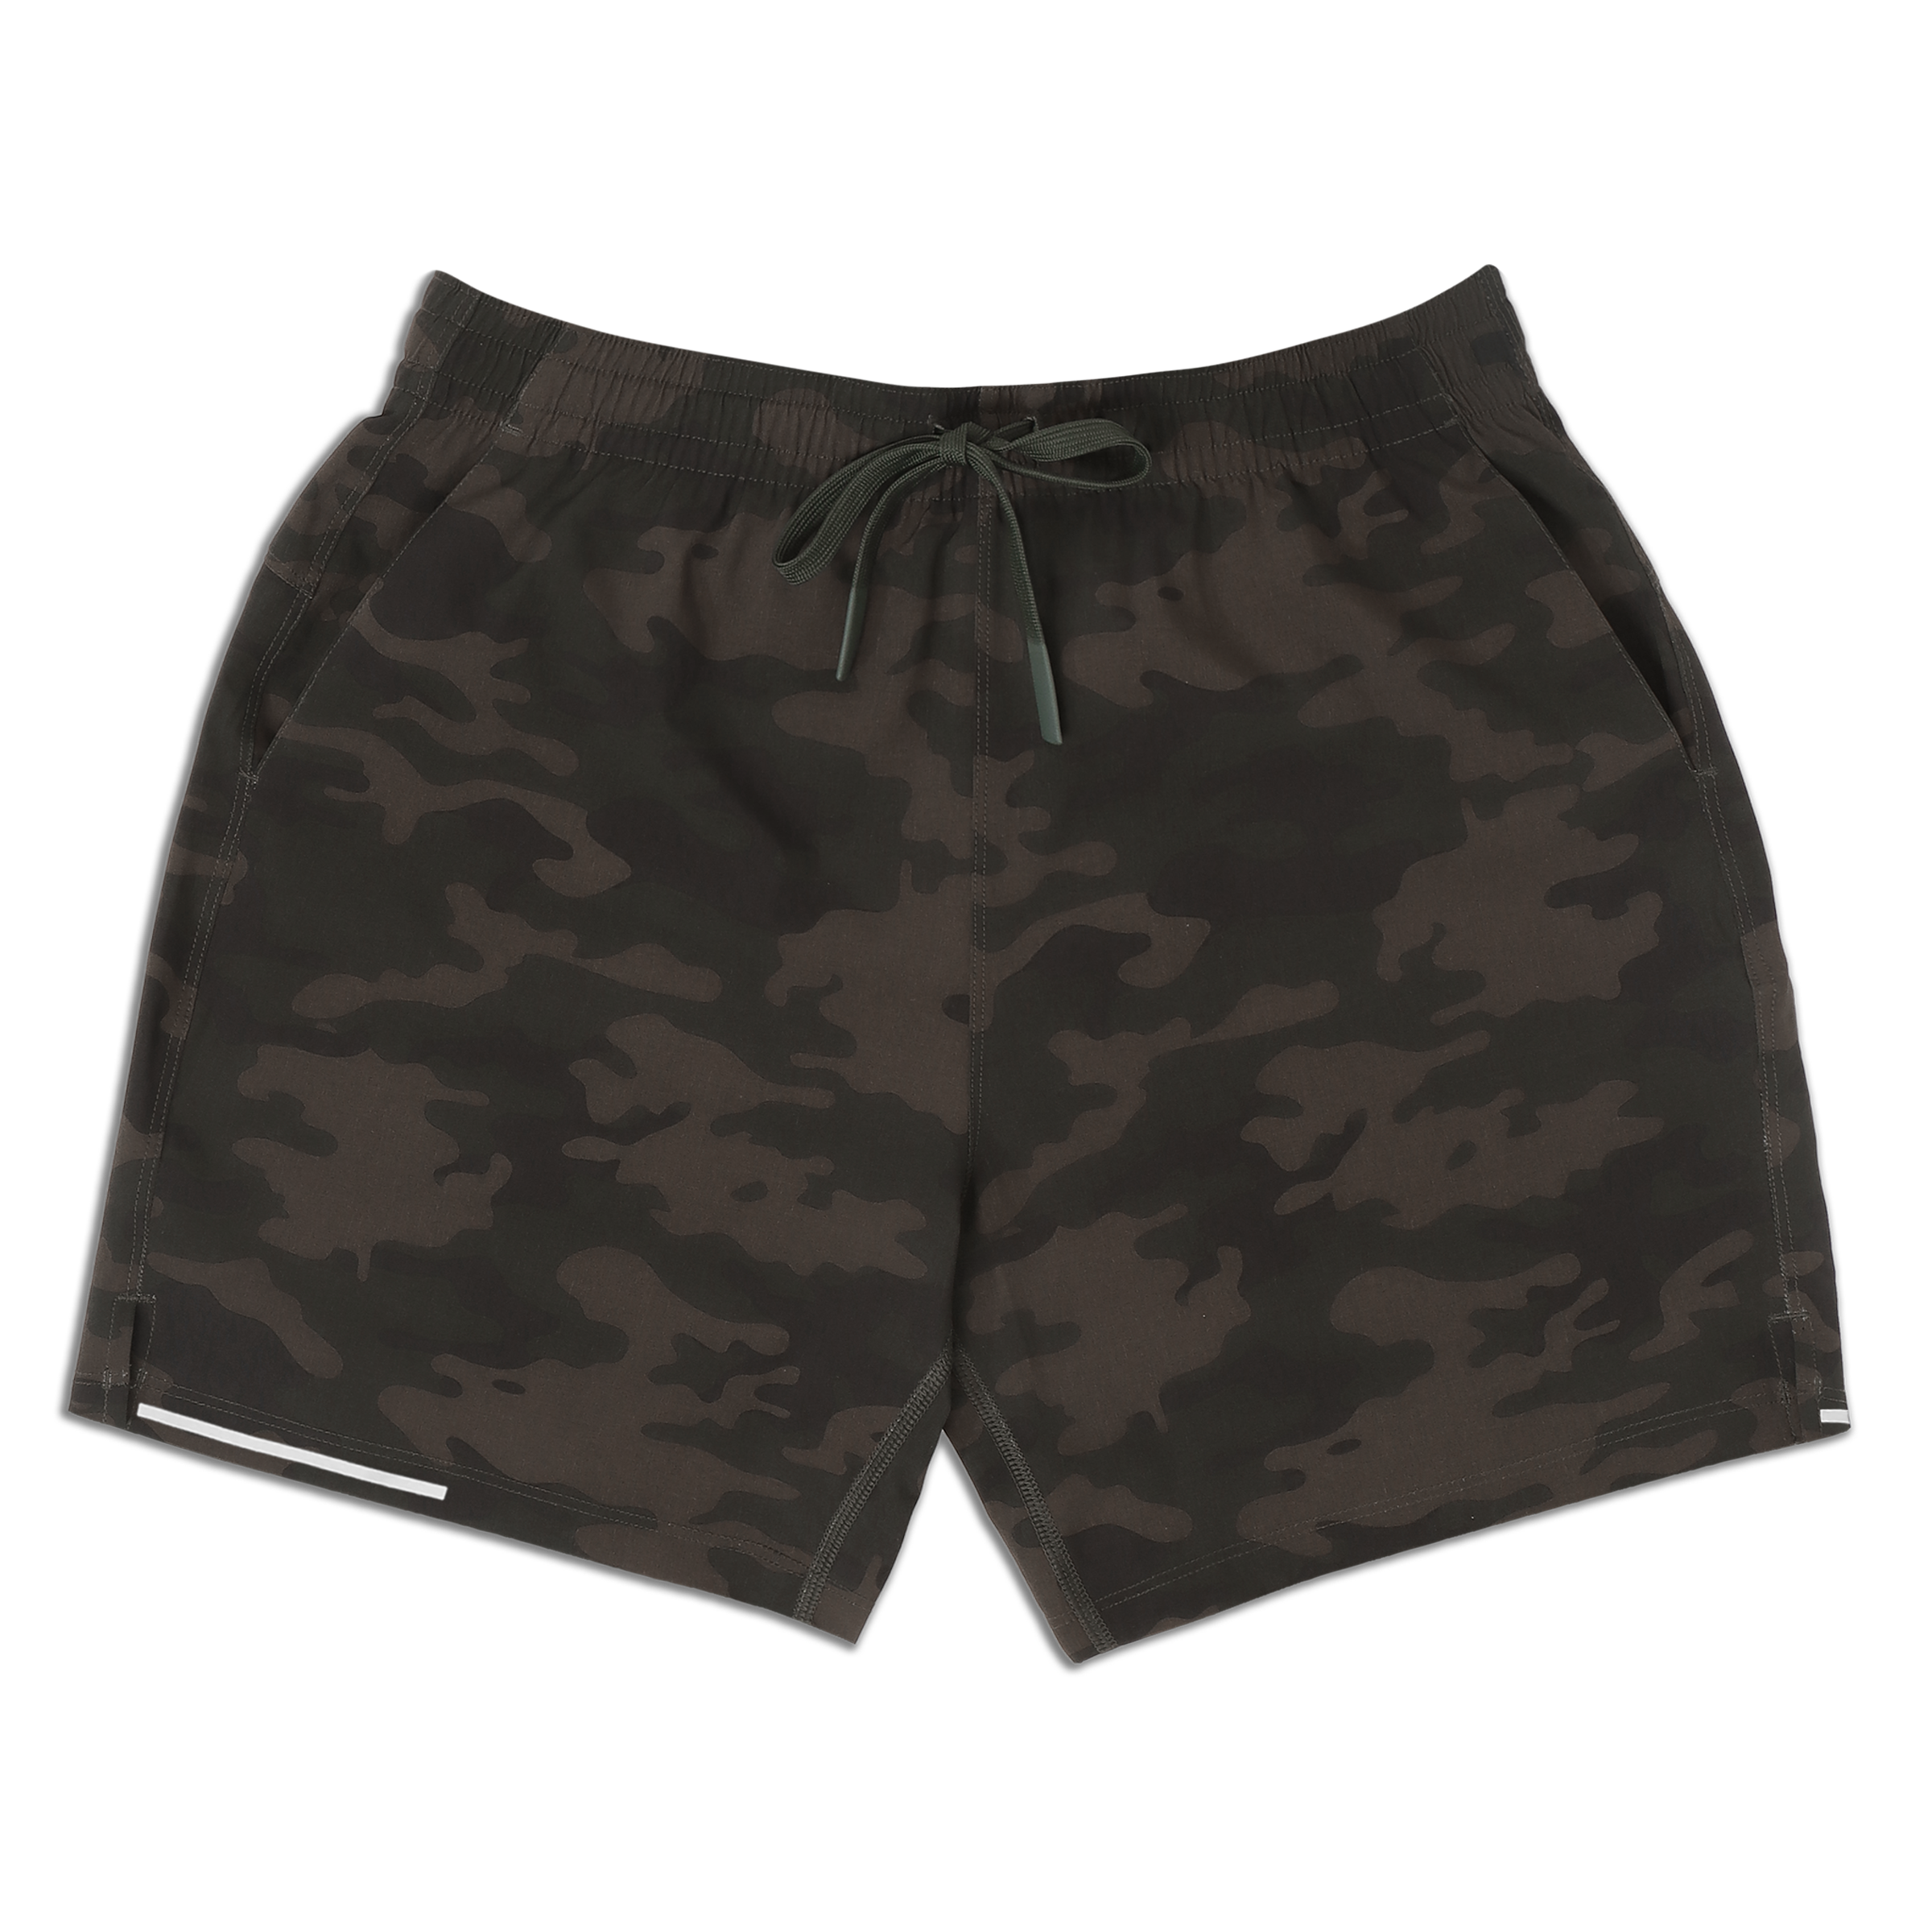 Run Short 5.5" Camo Green front with elastic waistband, dyed-to-match drawstring with rubberized tips, two front pockets, split hem, and reflective line on bottom right hem